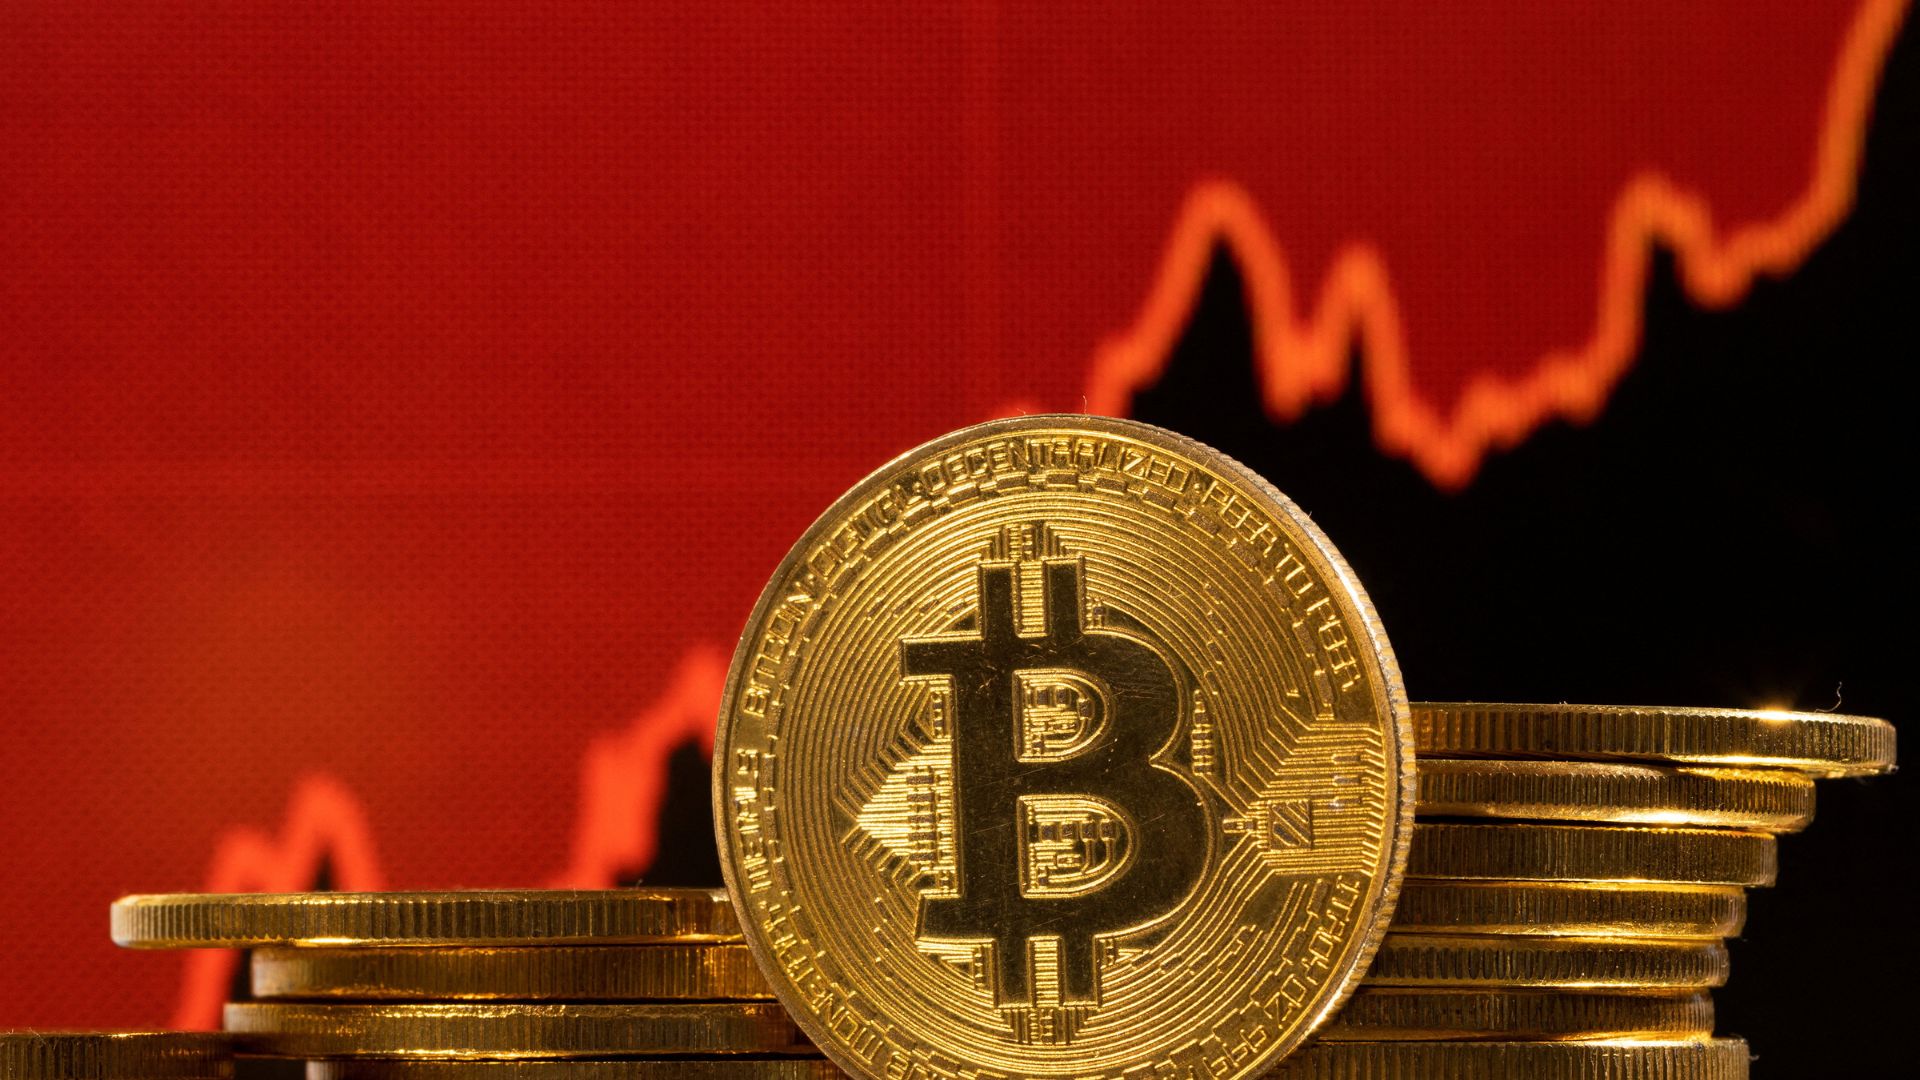 Bitcoin Price Prediction: Analyst Warns Of BTC Plunge And New Bear Market As Investors Look To Small-Cap Presales For Explosive Gains